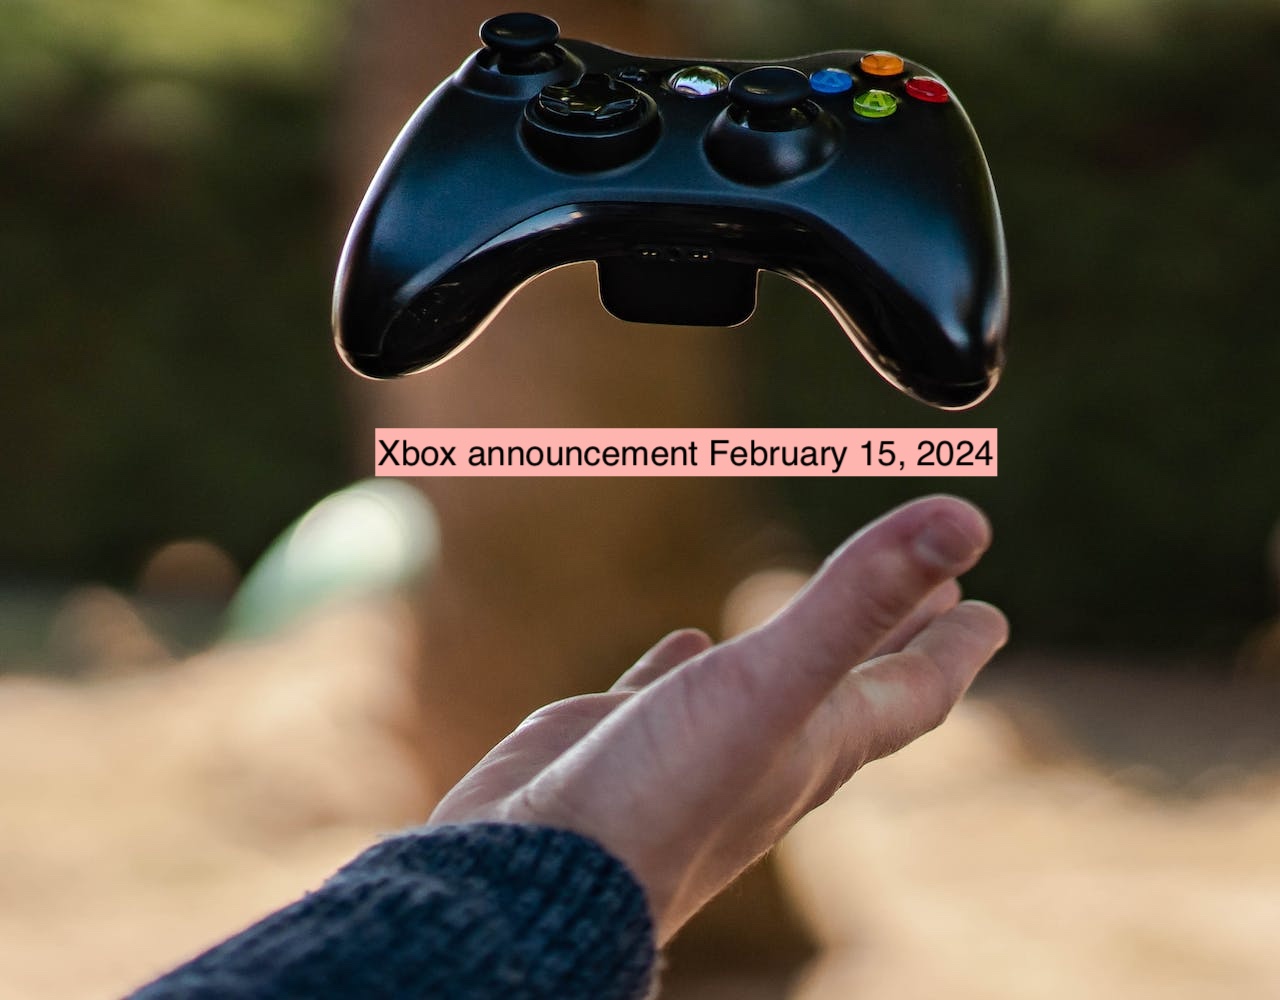 Xbox says no plans to quit consoles - but a podcast format announcement?